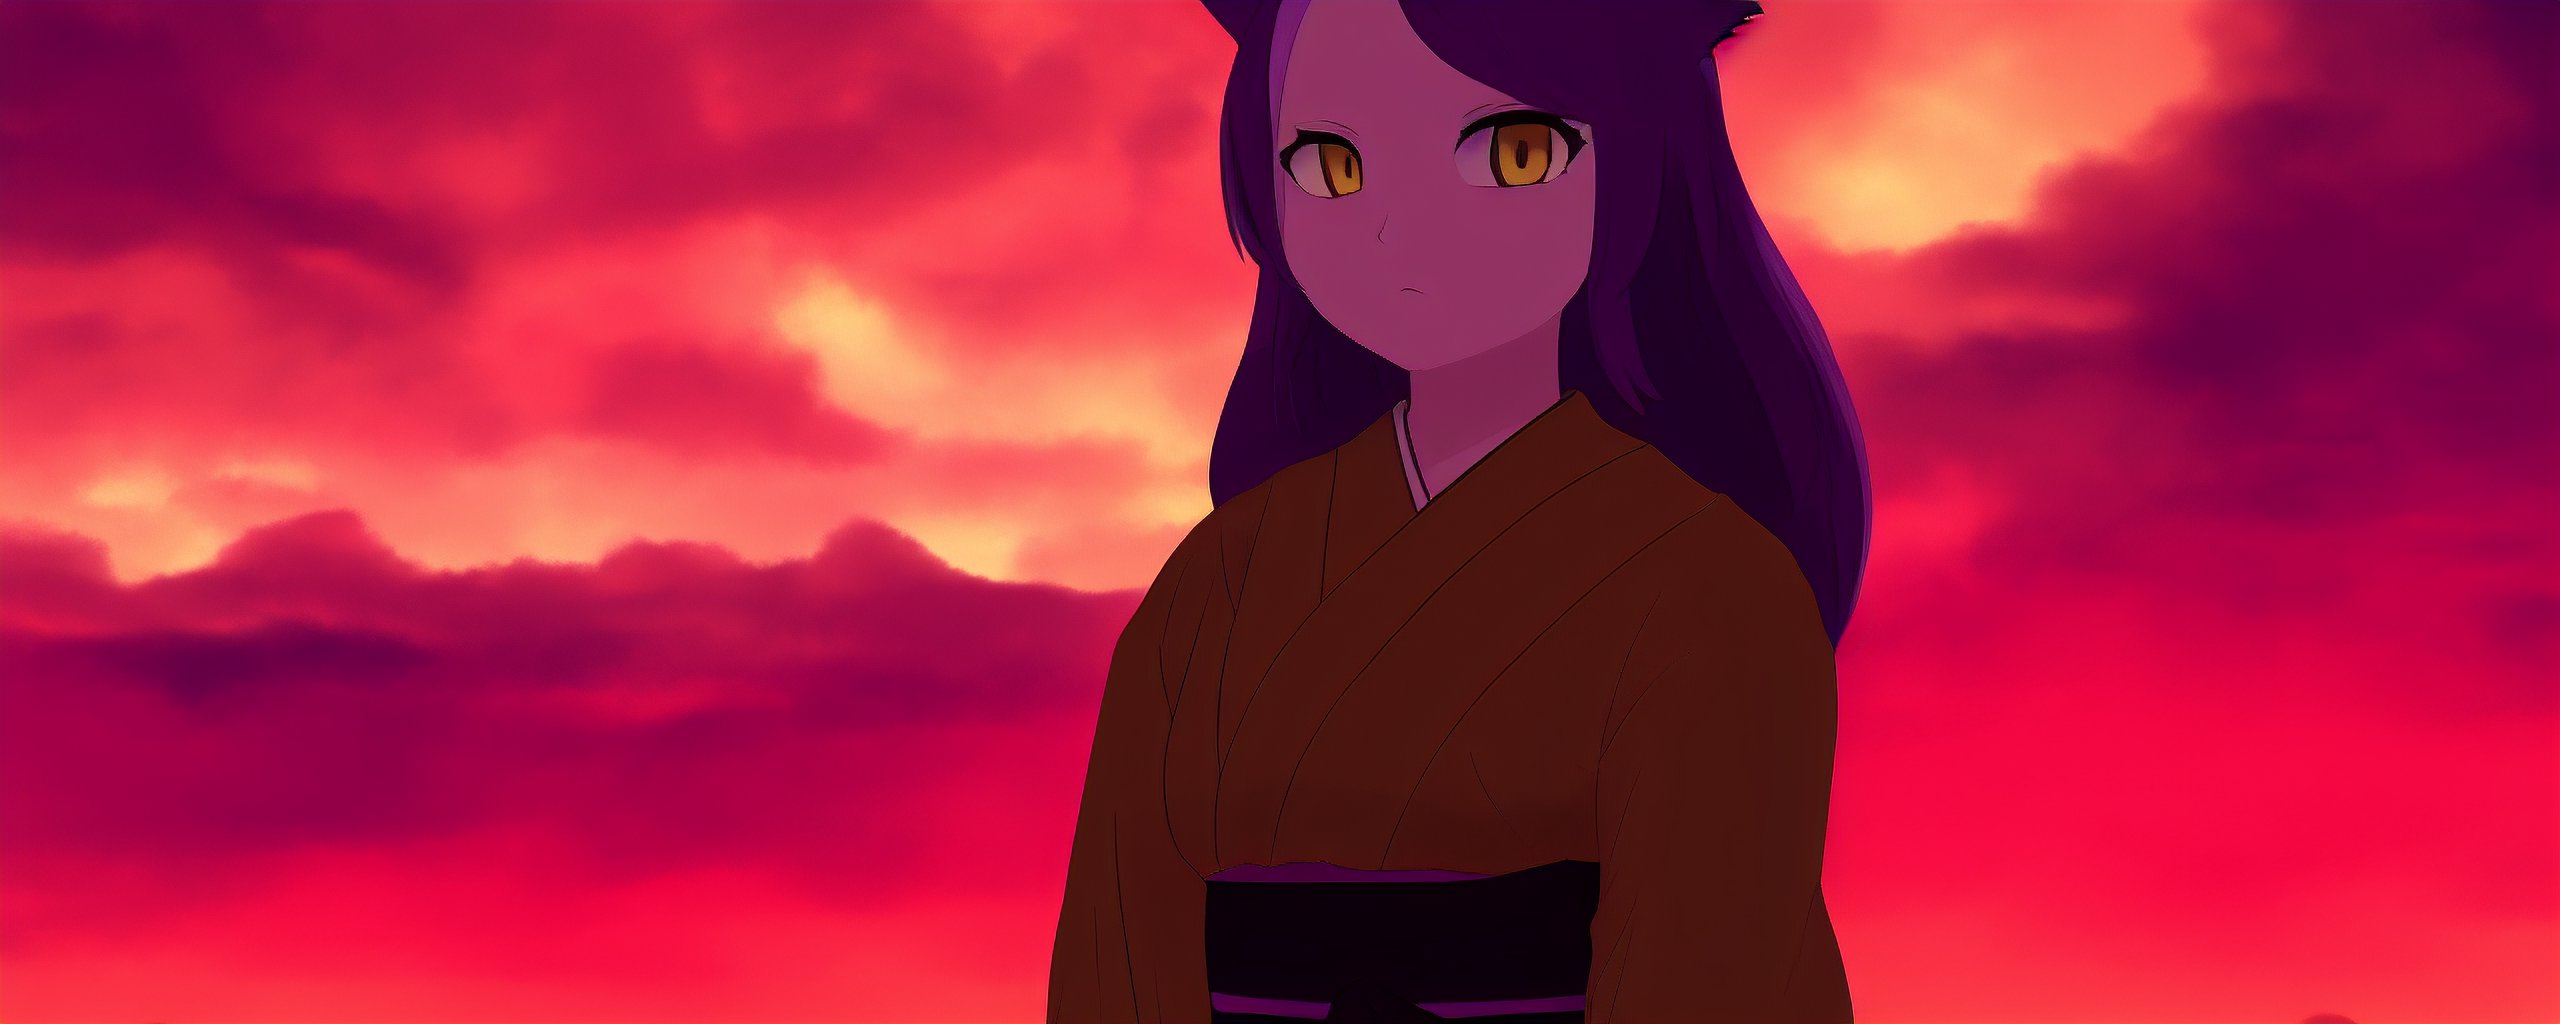 An image of 1girl, kimono, animal crossing, klaxon, loud noises, overwhelming, red sky, clouds, storms, long hair, purple hair, yellow eyes, fox ears, thick outlines, ink outlines, black outlines